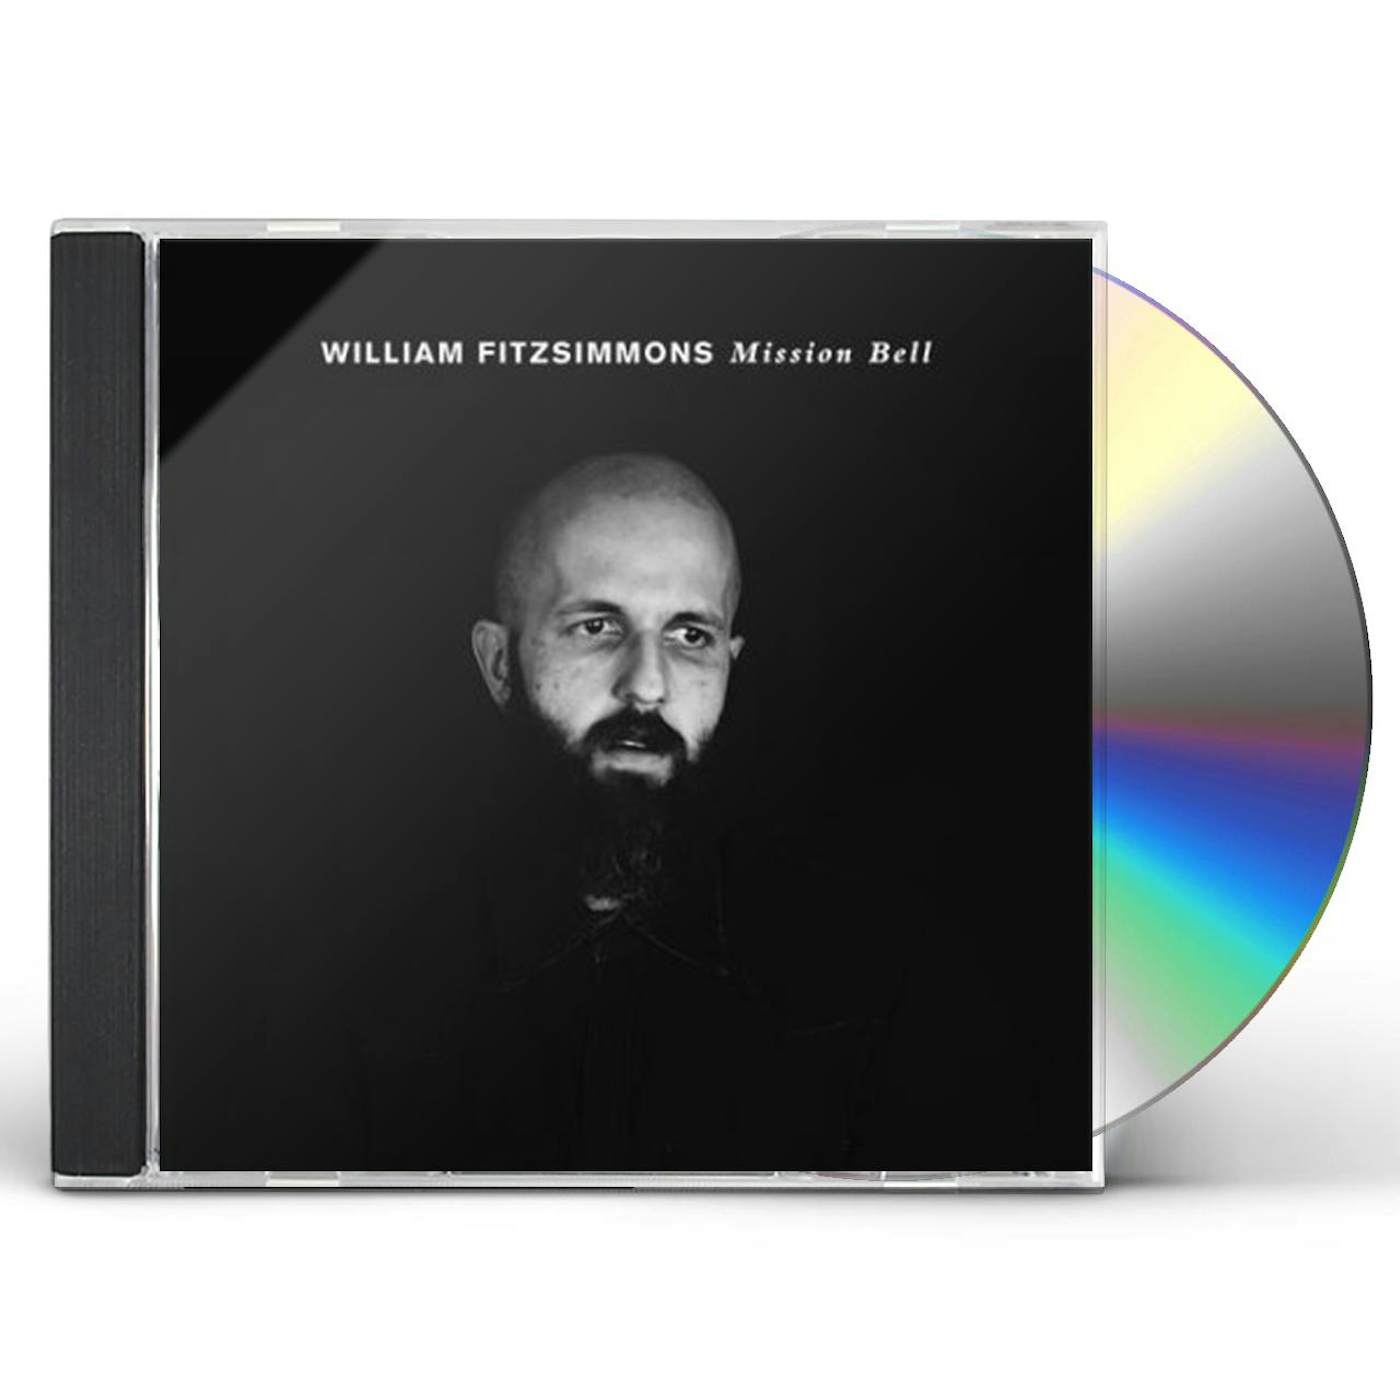 William Fitzsimmons Mission Bell CD